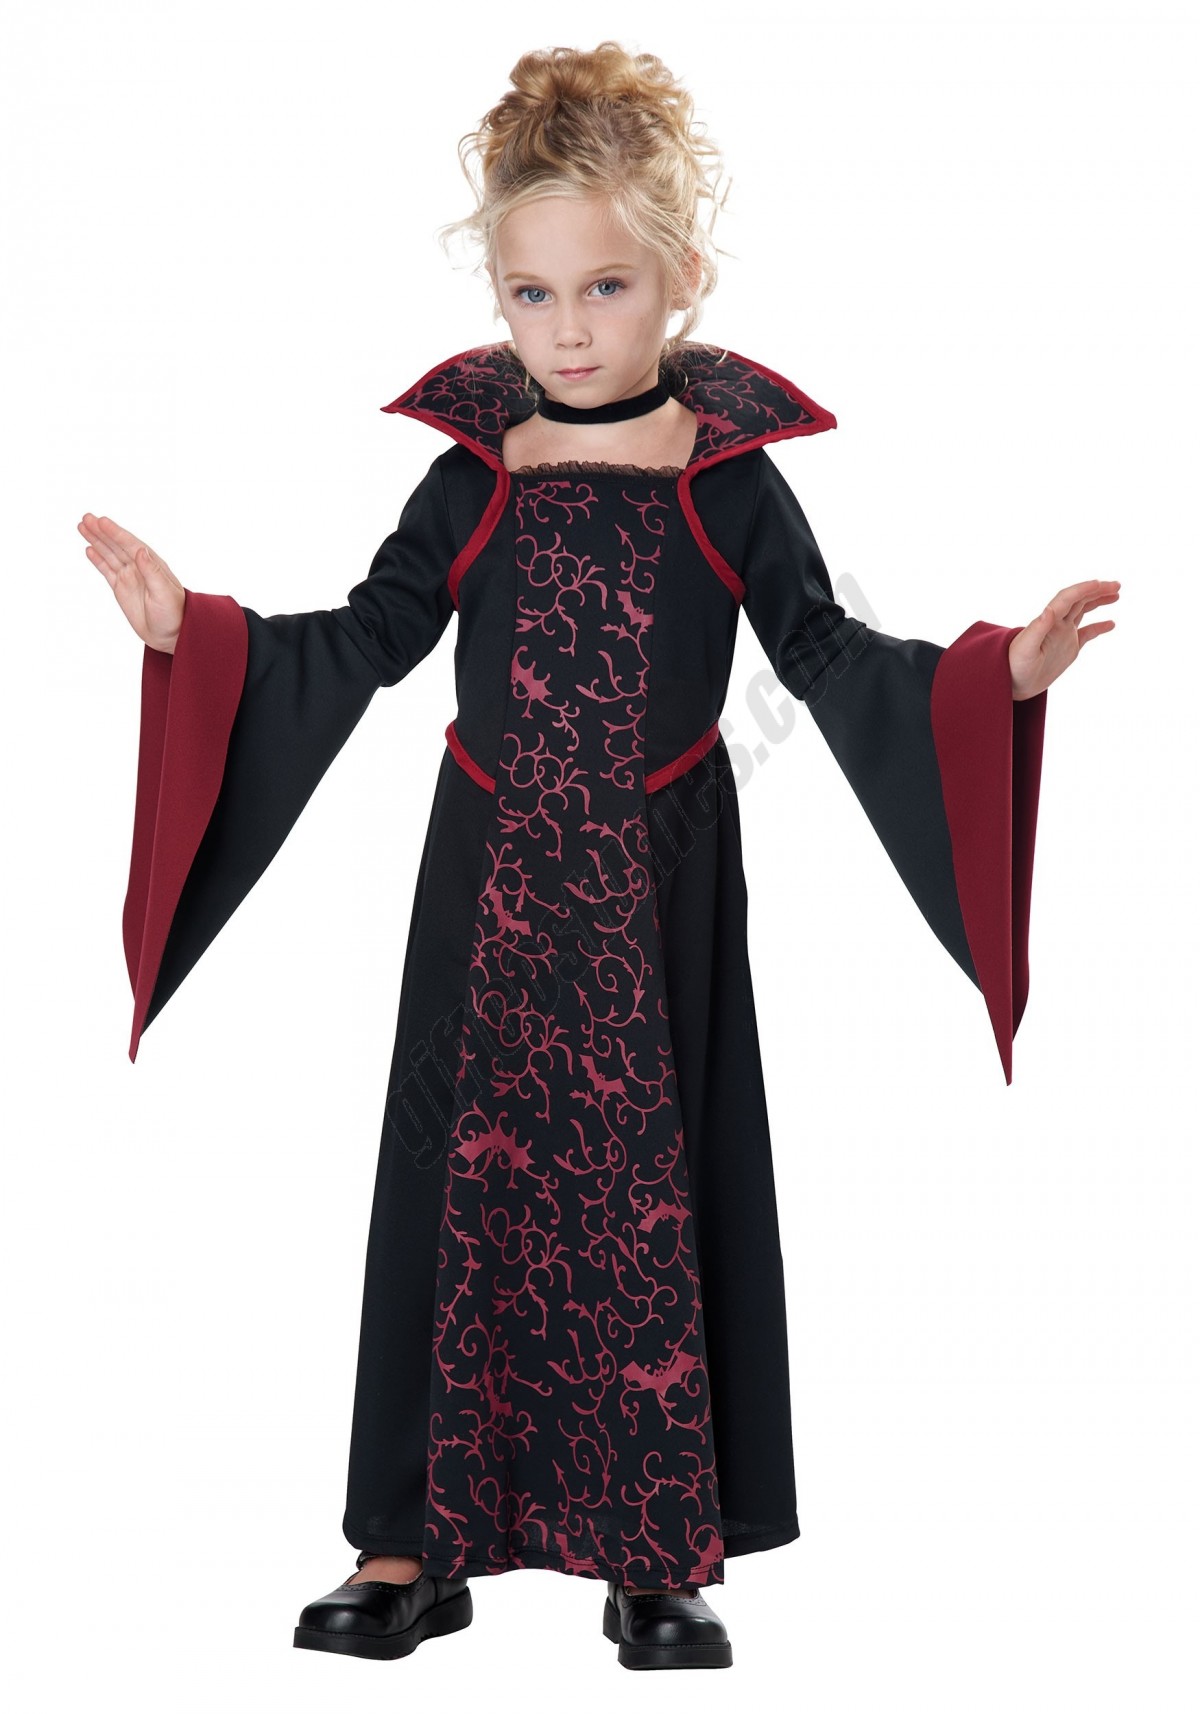 Toddlers Royal Vampire Costume Promotions - -0